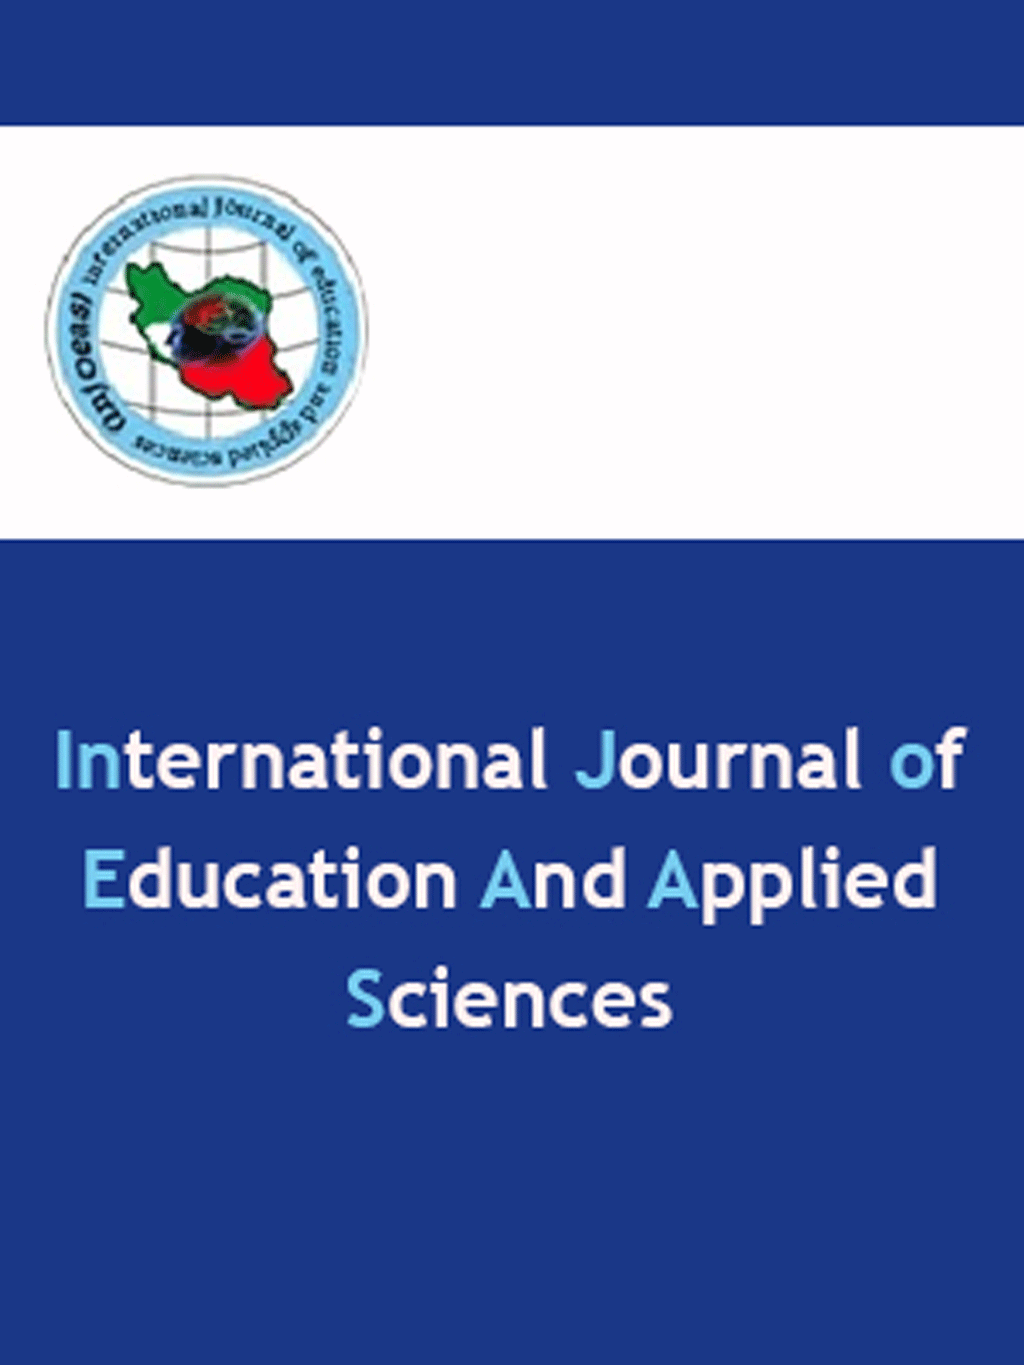 Education and Applied Sciences - July 2021, Volume 2 - Number 2